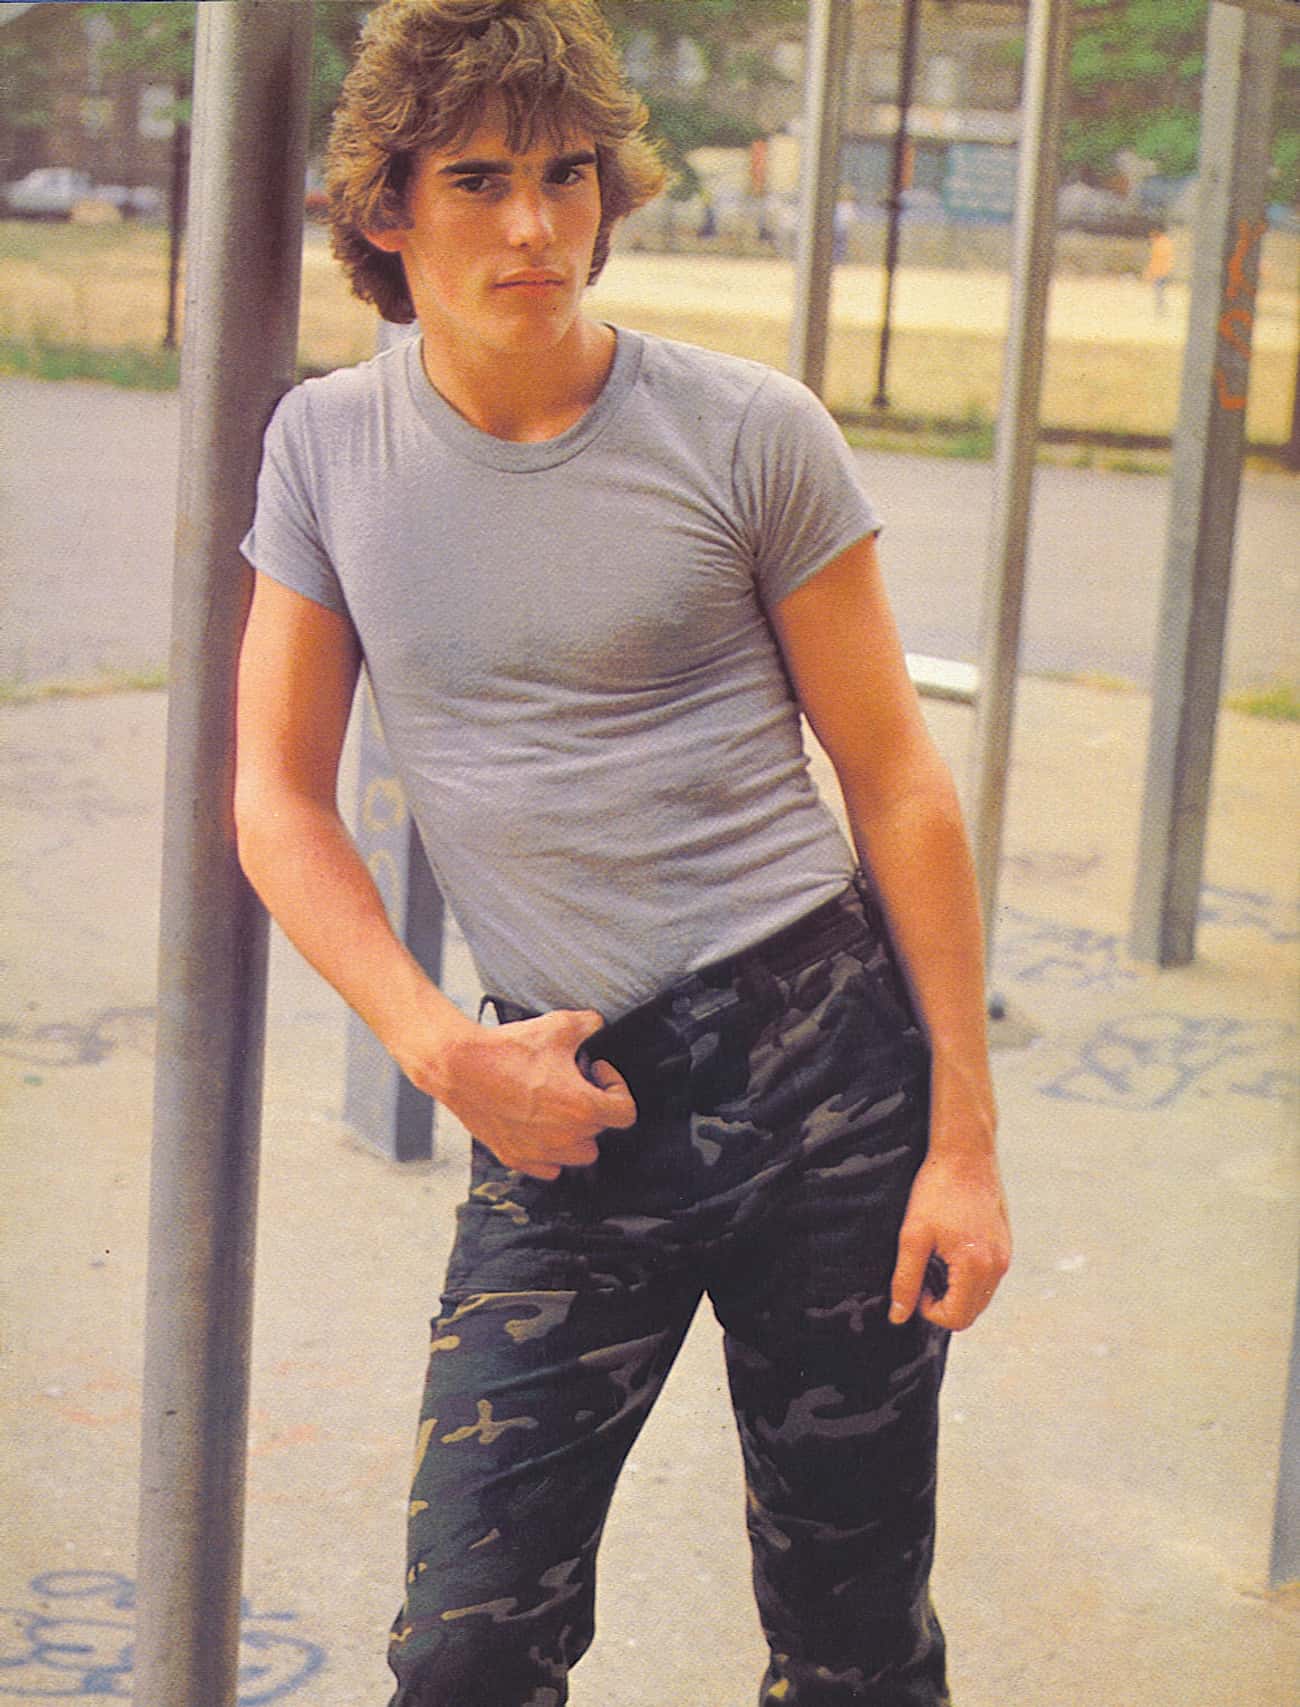 Young Matt Dillon in Dark Camo Pants and Fitted Gray Shirt